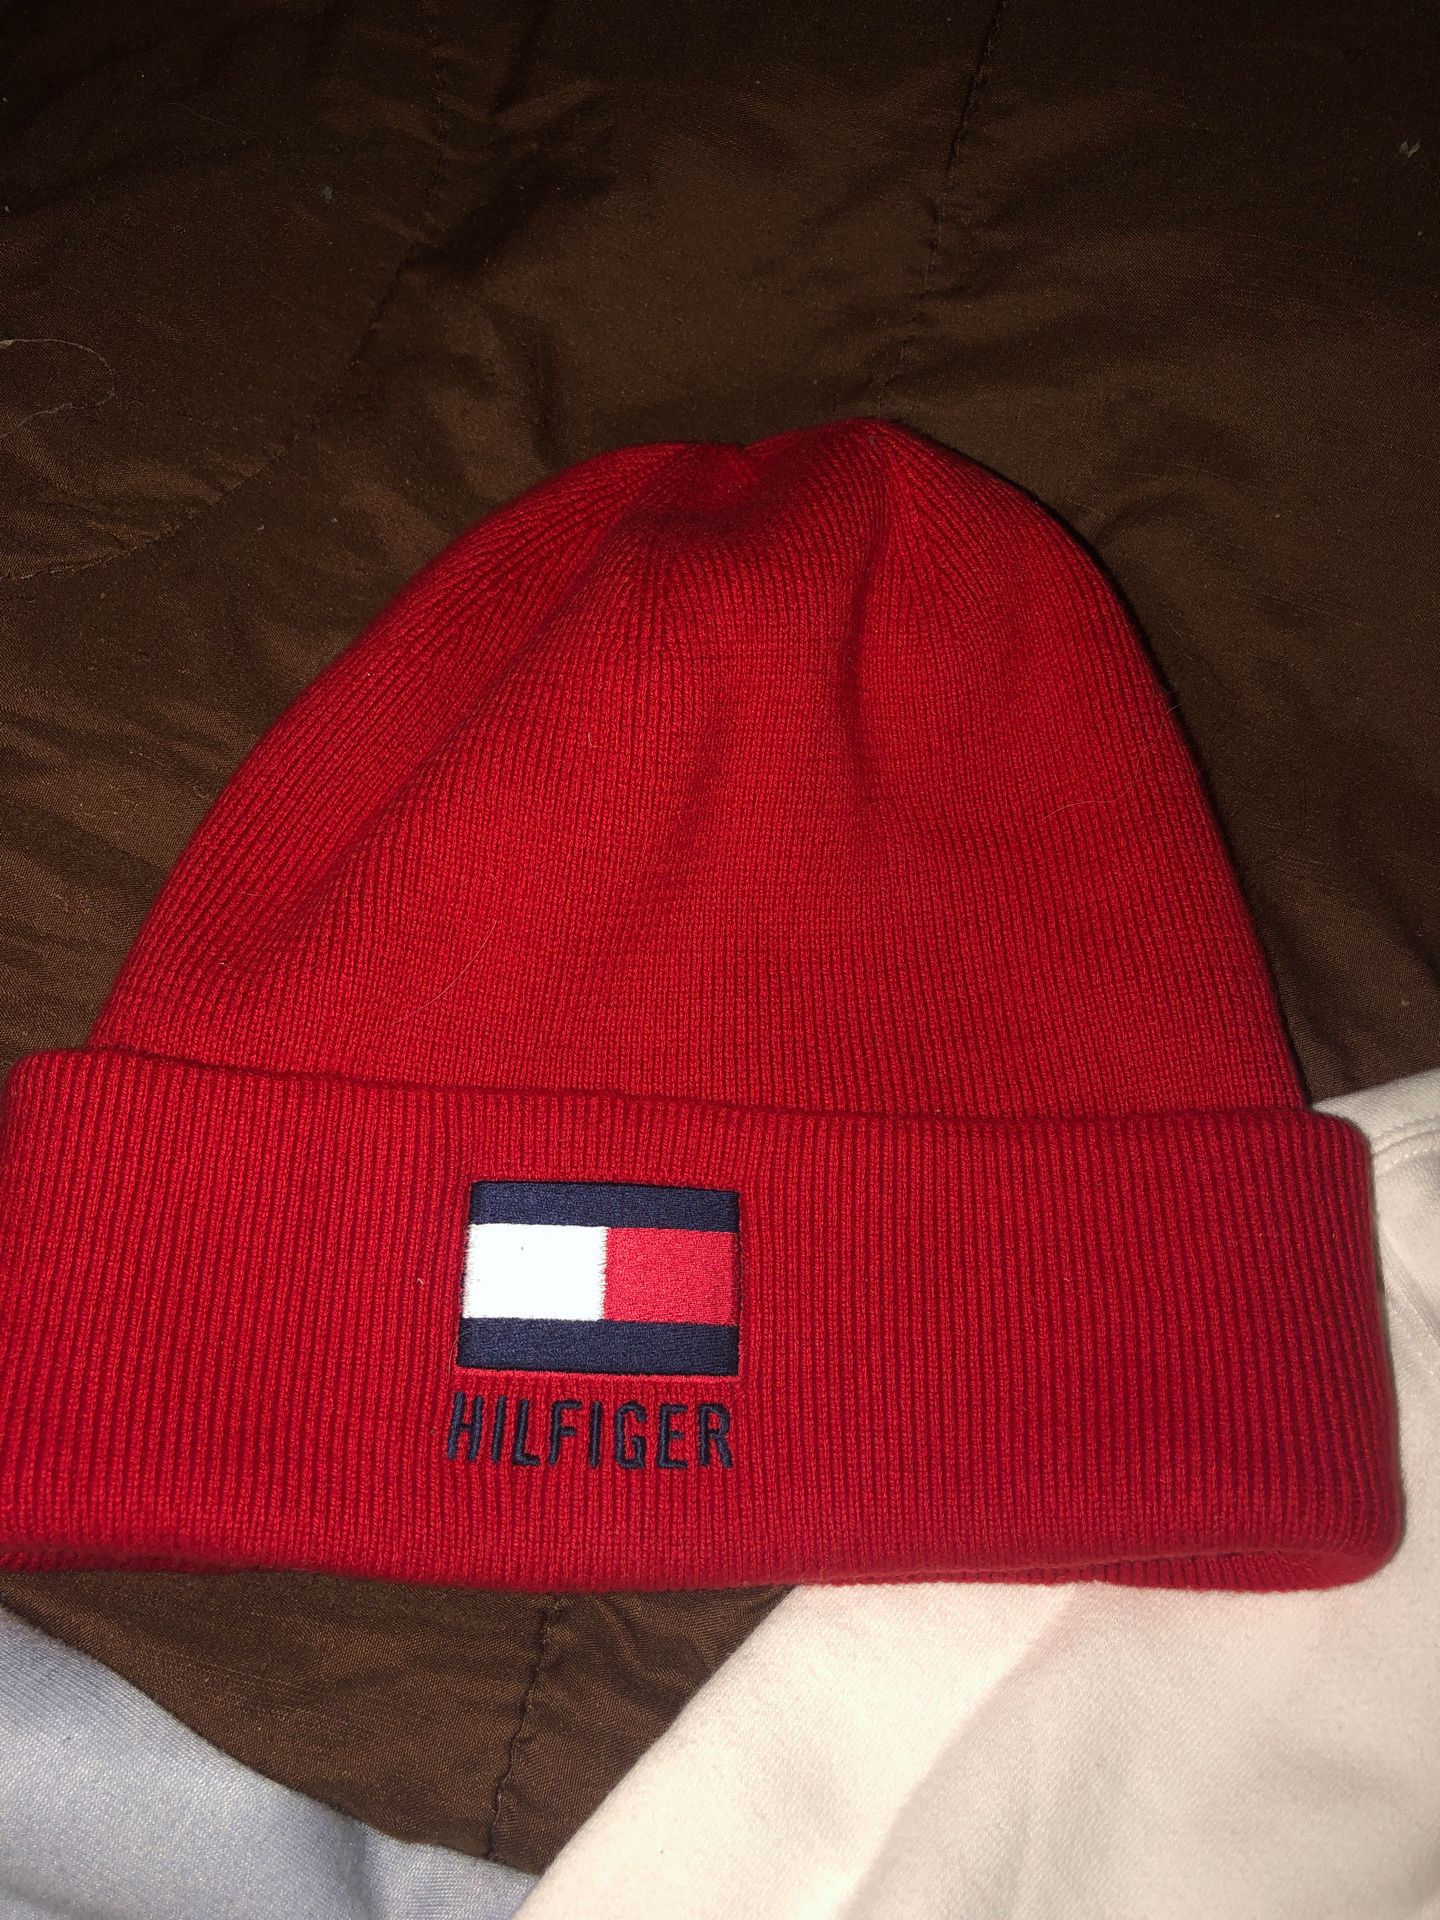 Tommy Hilfiger beanie for sale